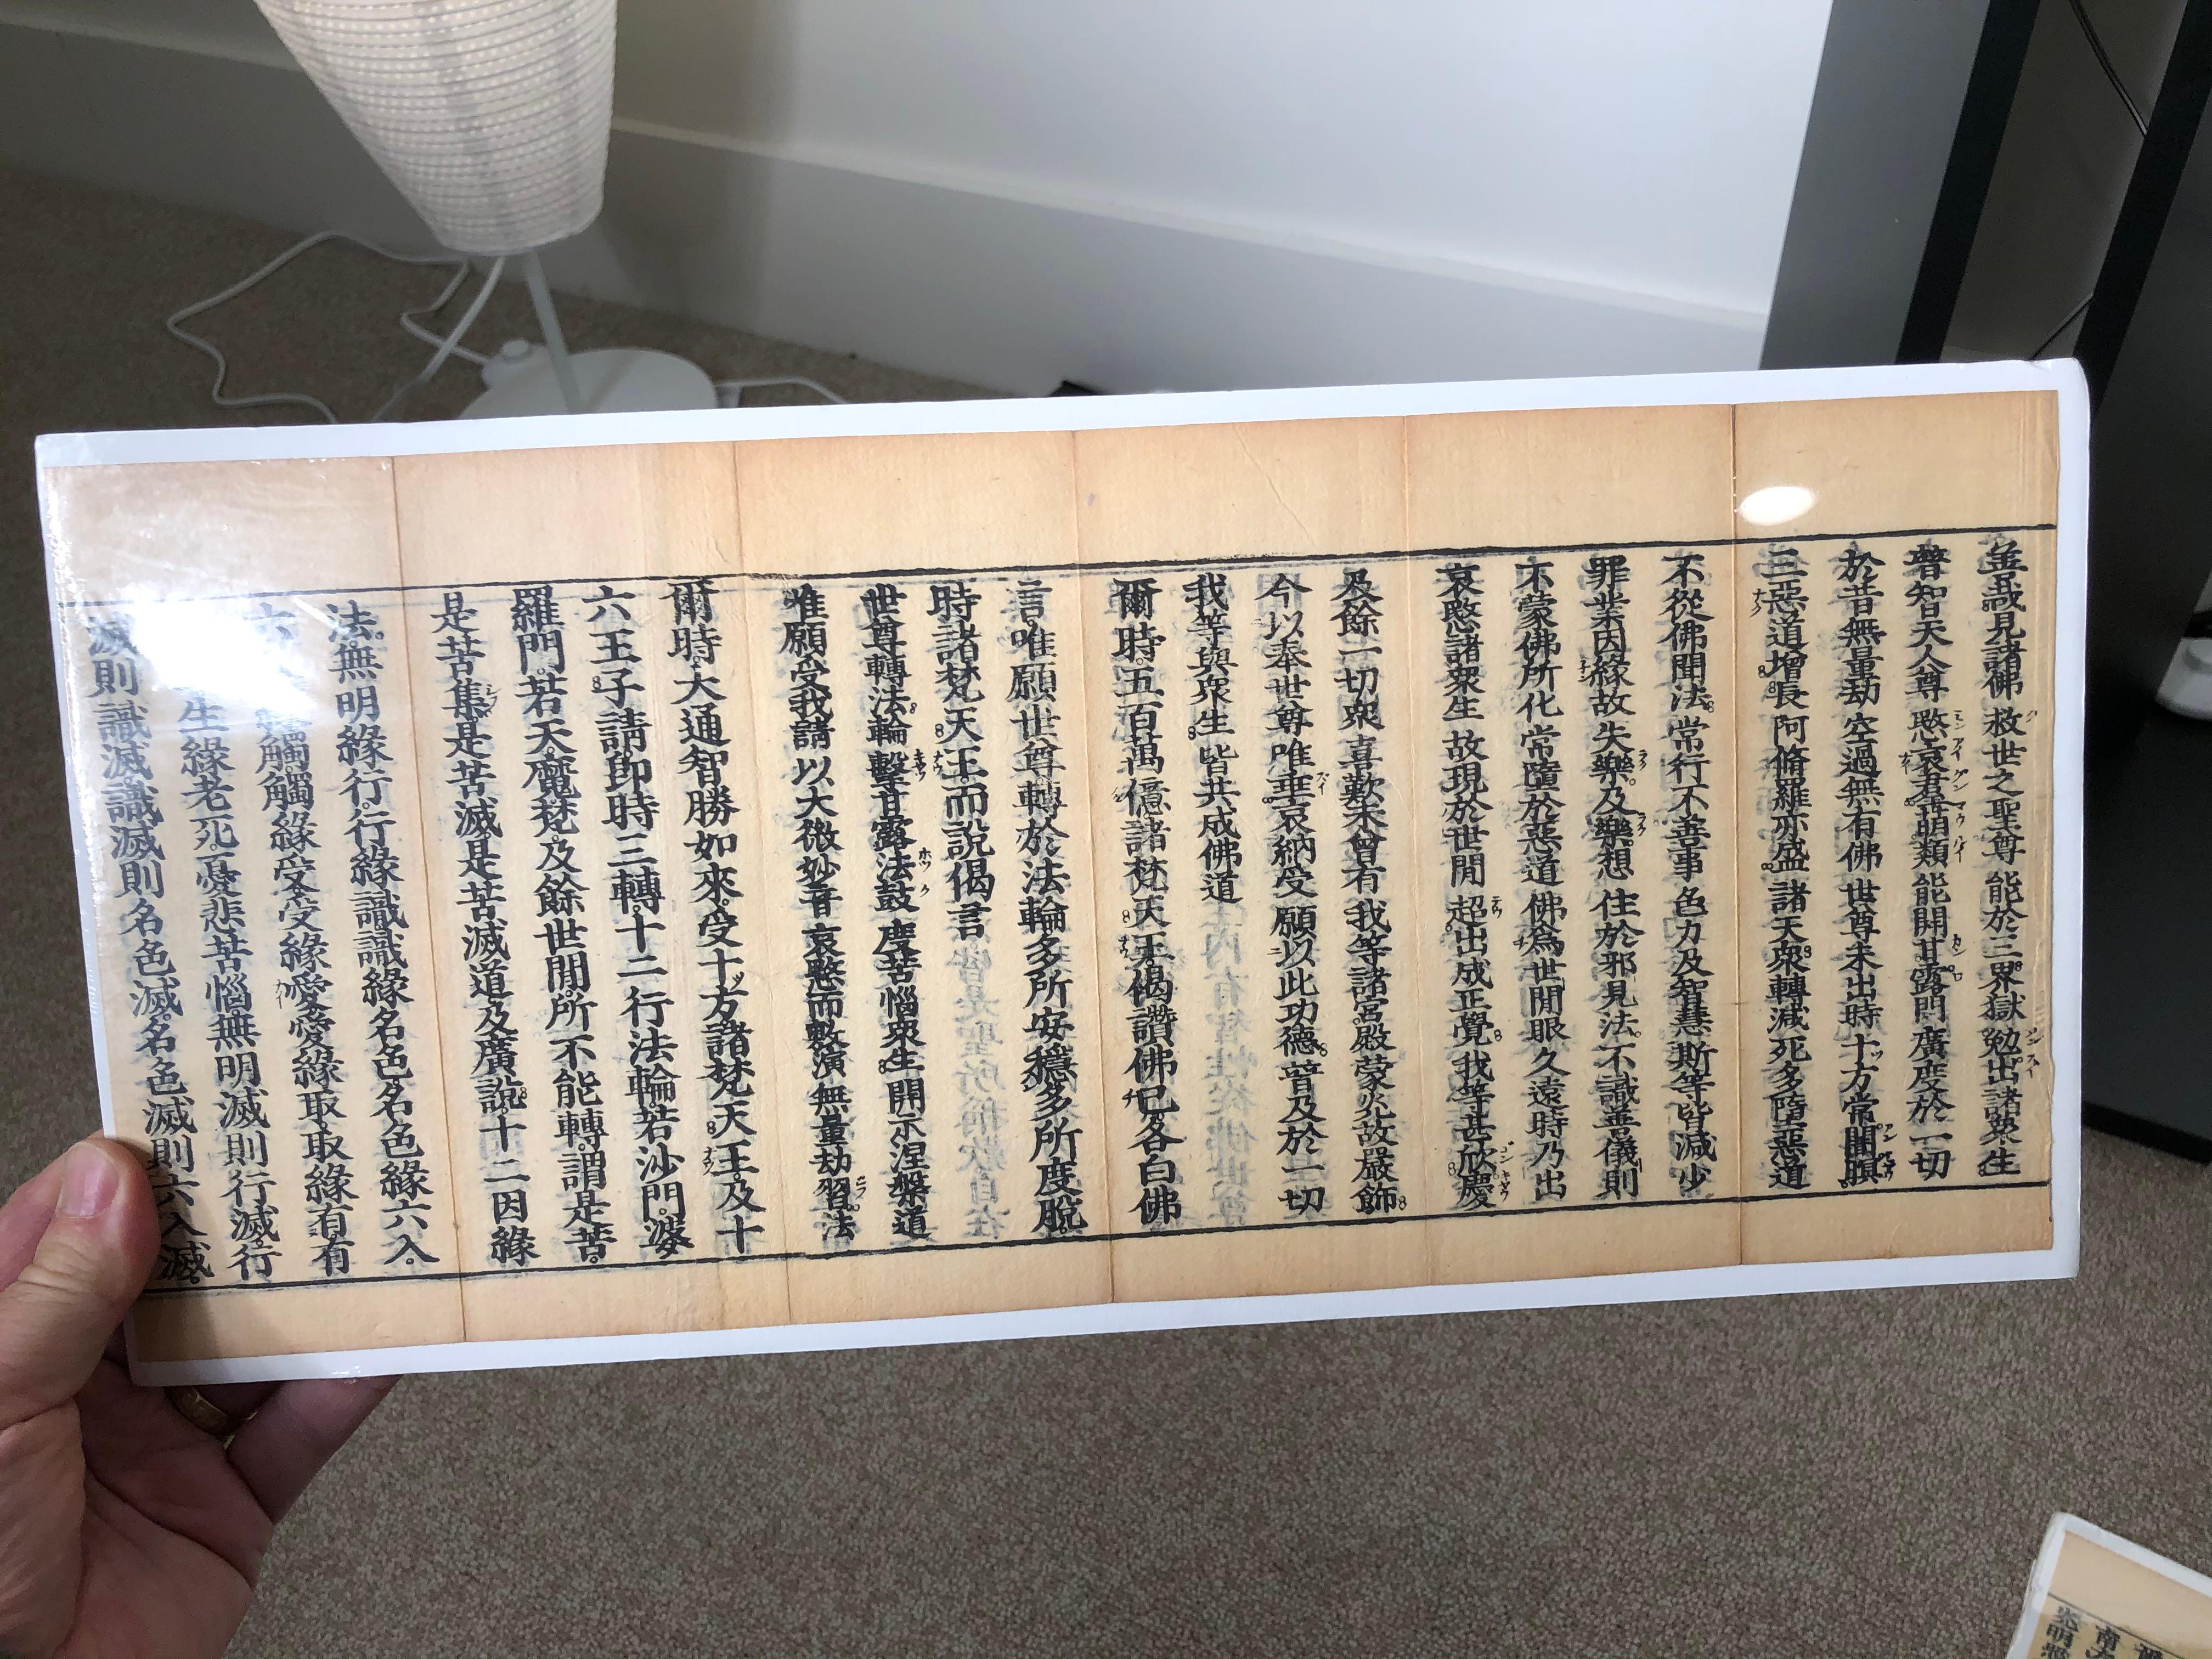 Japanese Four Antique Buddhist SACRED SUTRAS Woodblock Prints 1878, Frameable #1 4